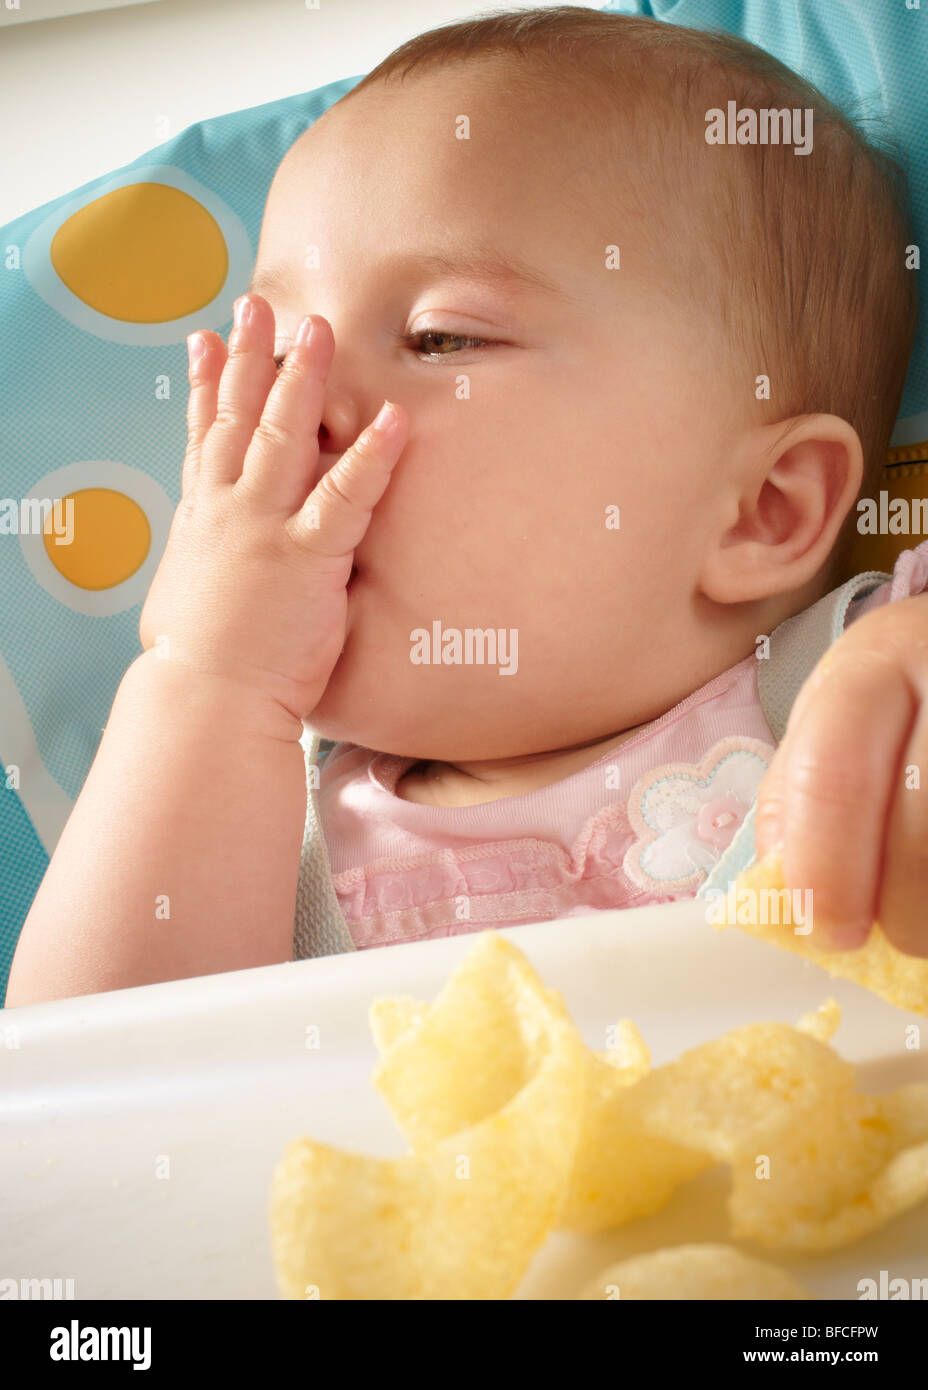 Baby Girl in pink top feeding and being fed in blue and yellow high chair Stock Photo